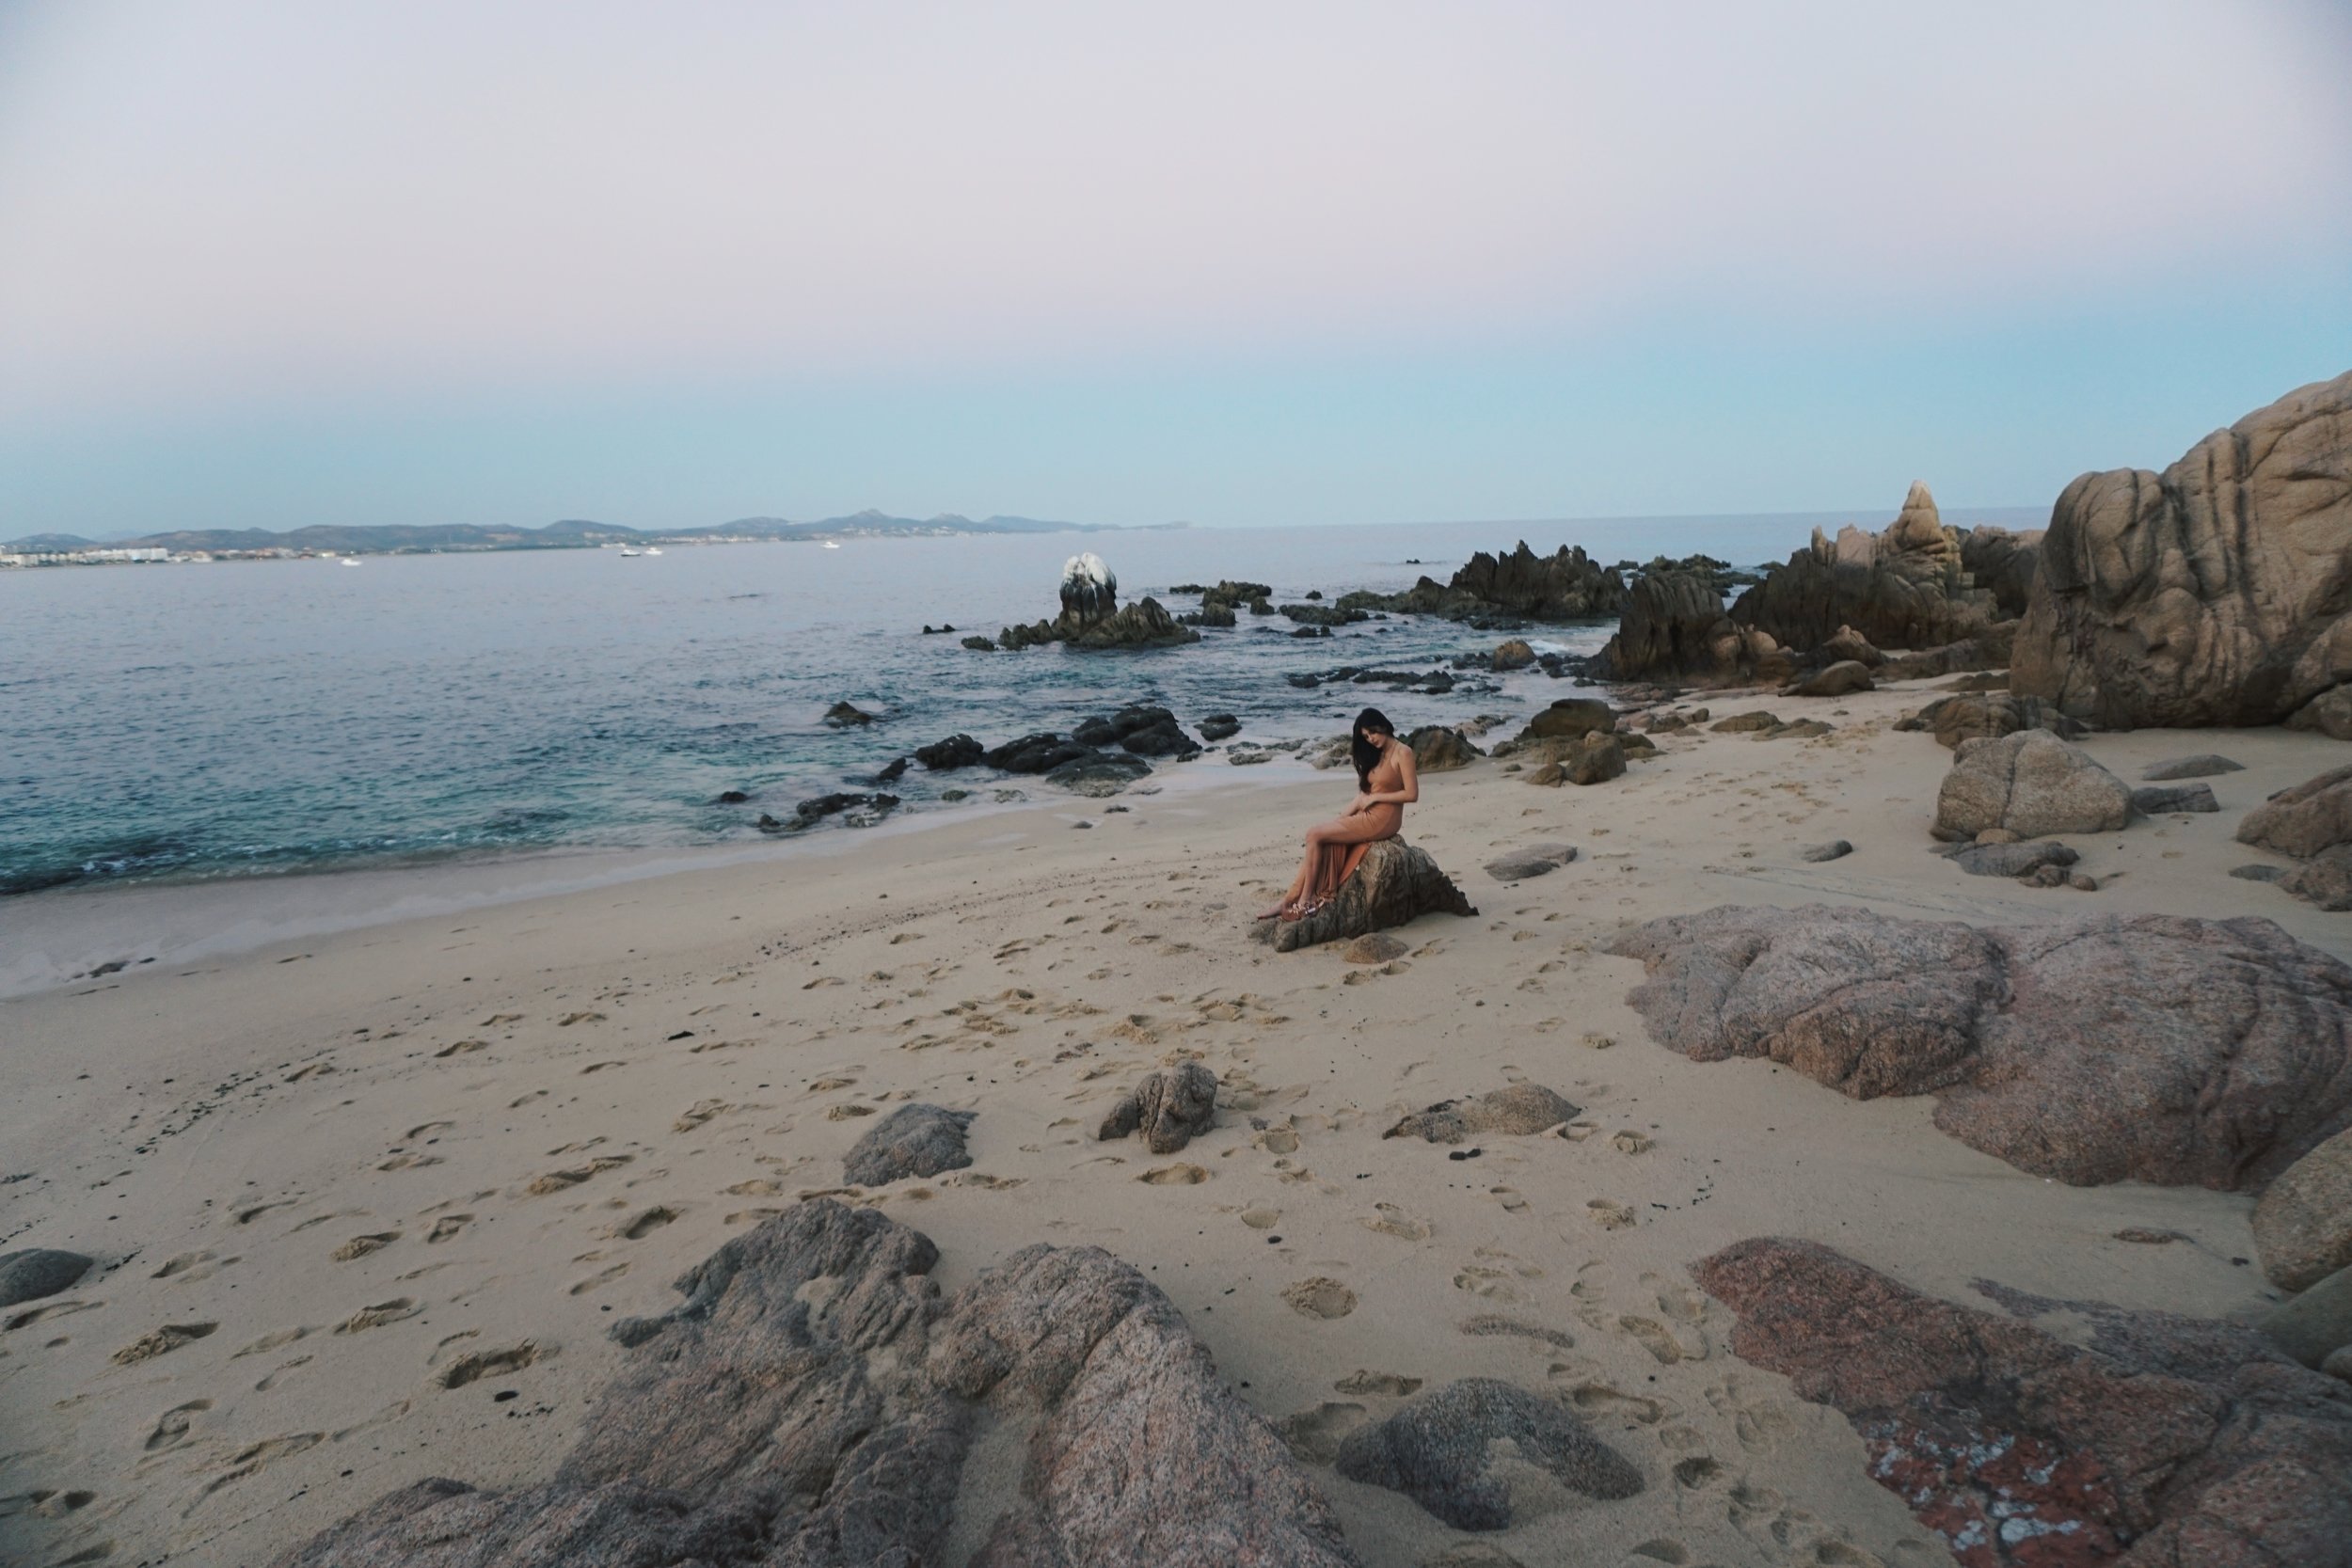 Sunset at the One and Only Palmilla with Julia Friedman.